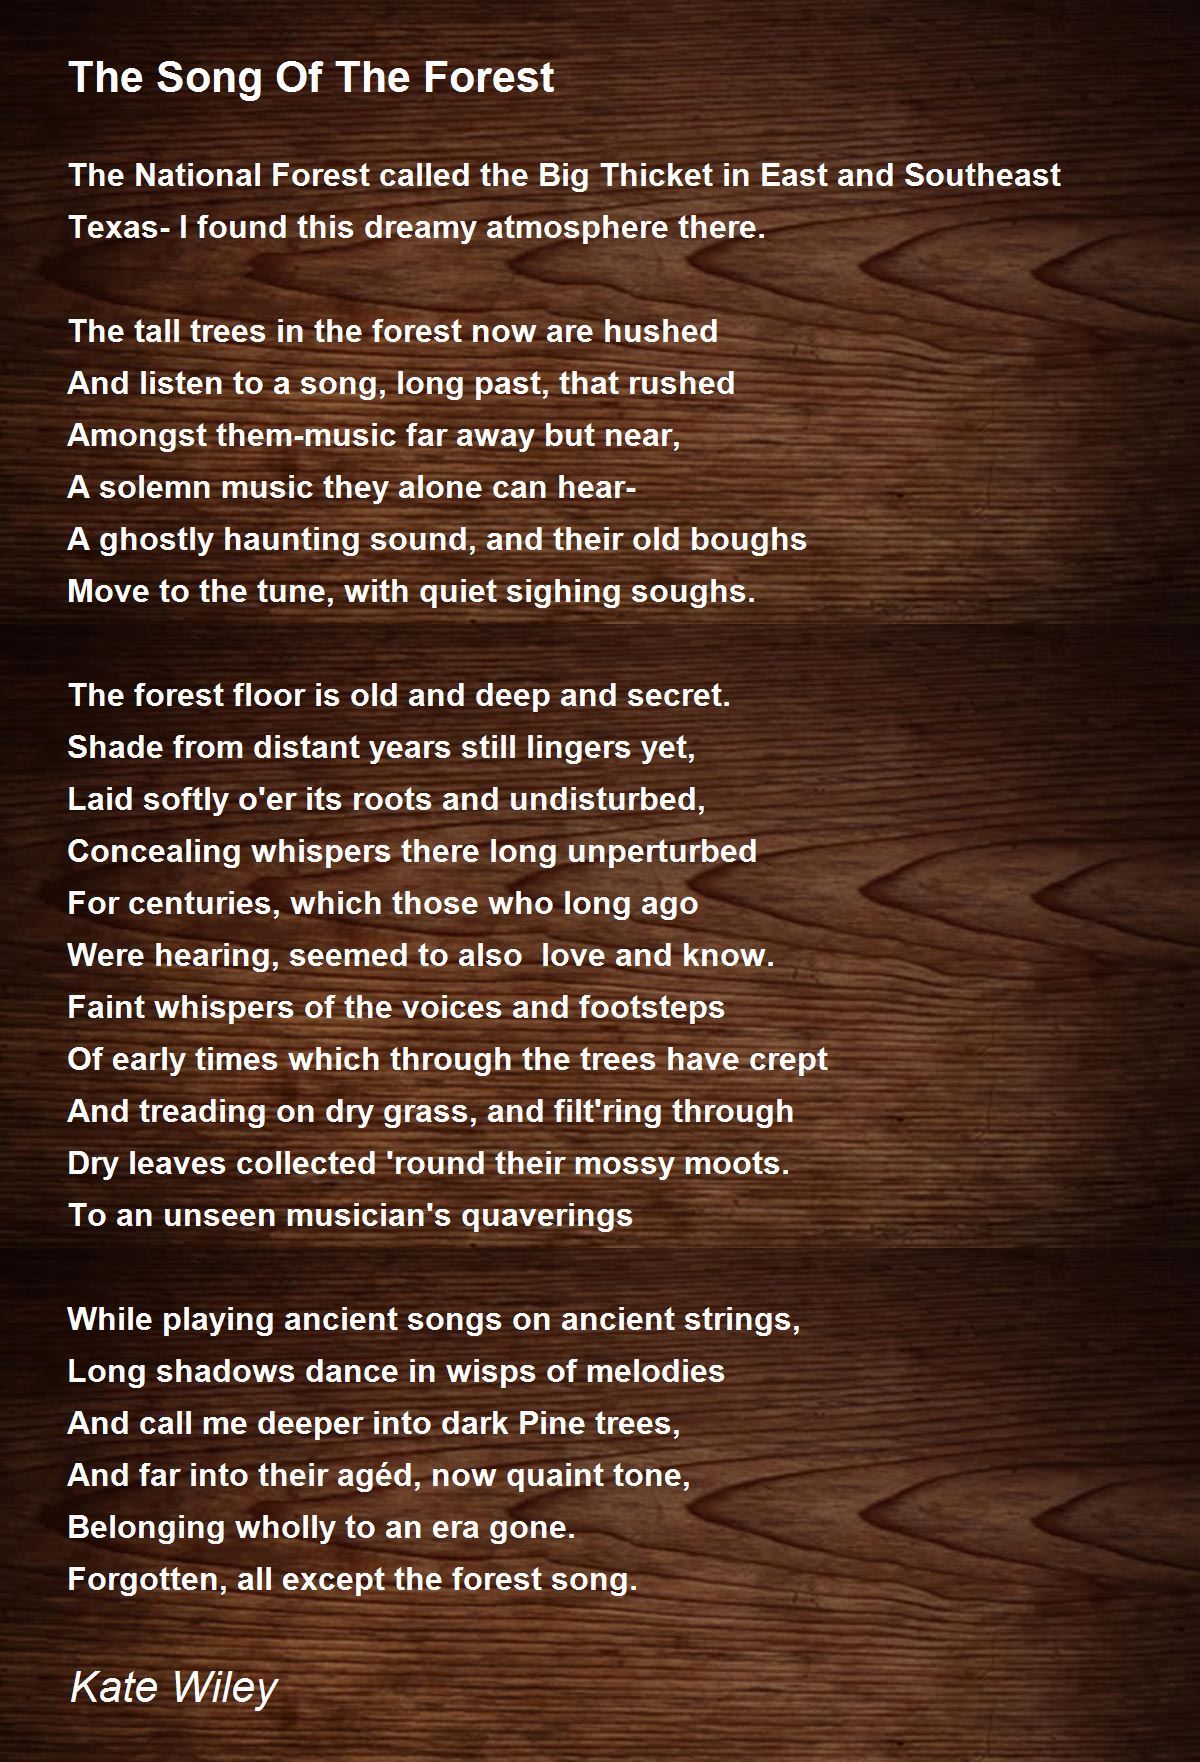 The Song Of The Forest - The Song Of The Forest Poem by Kate Wiley